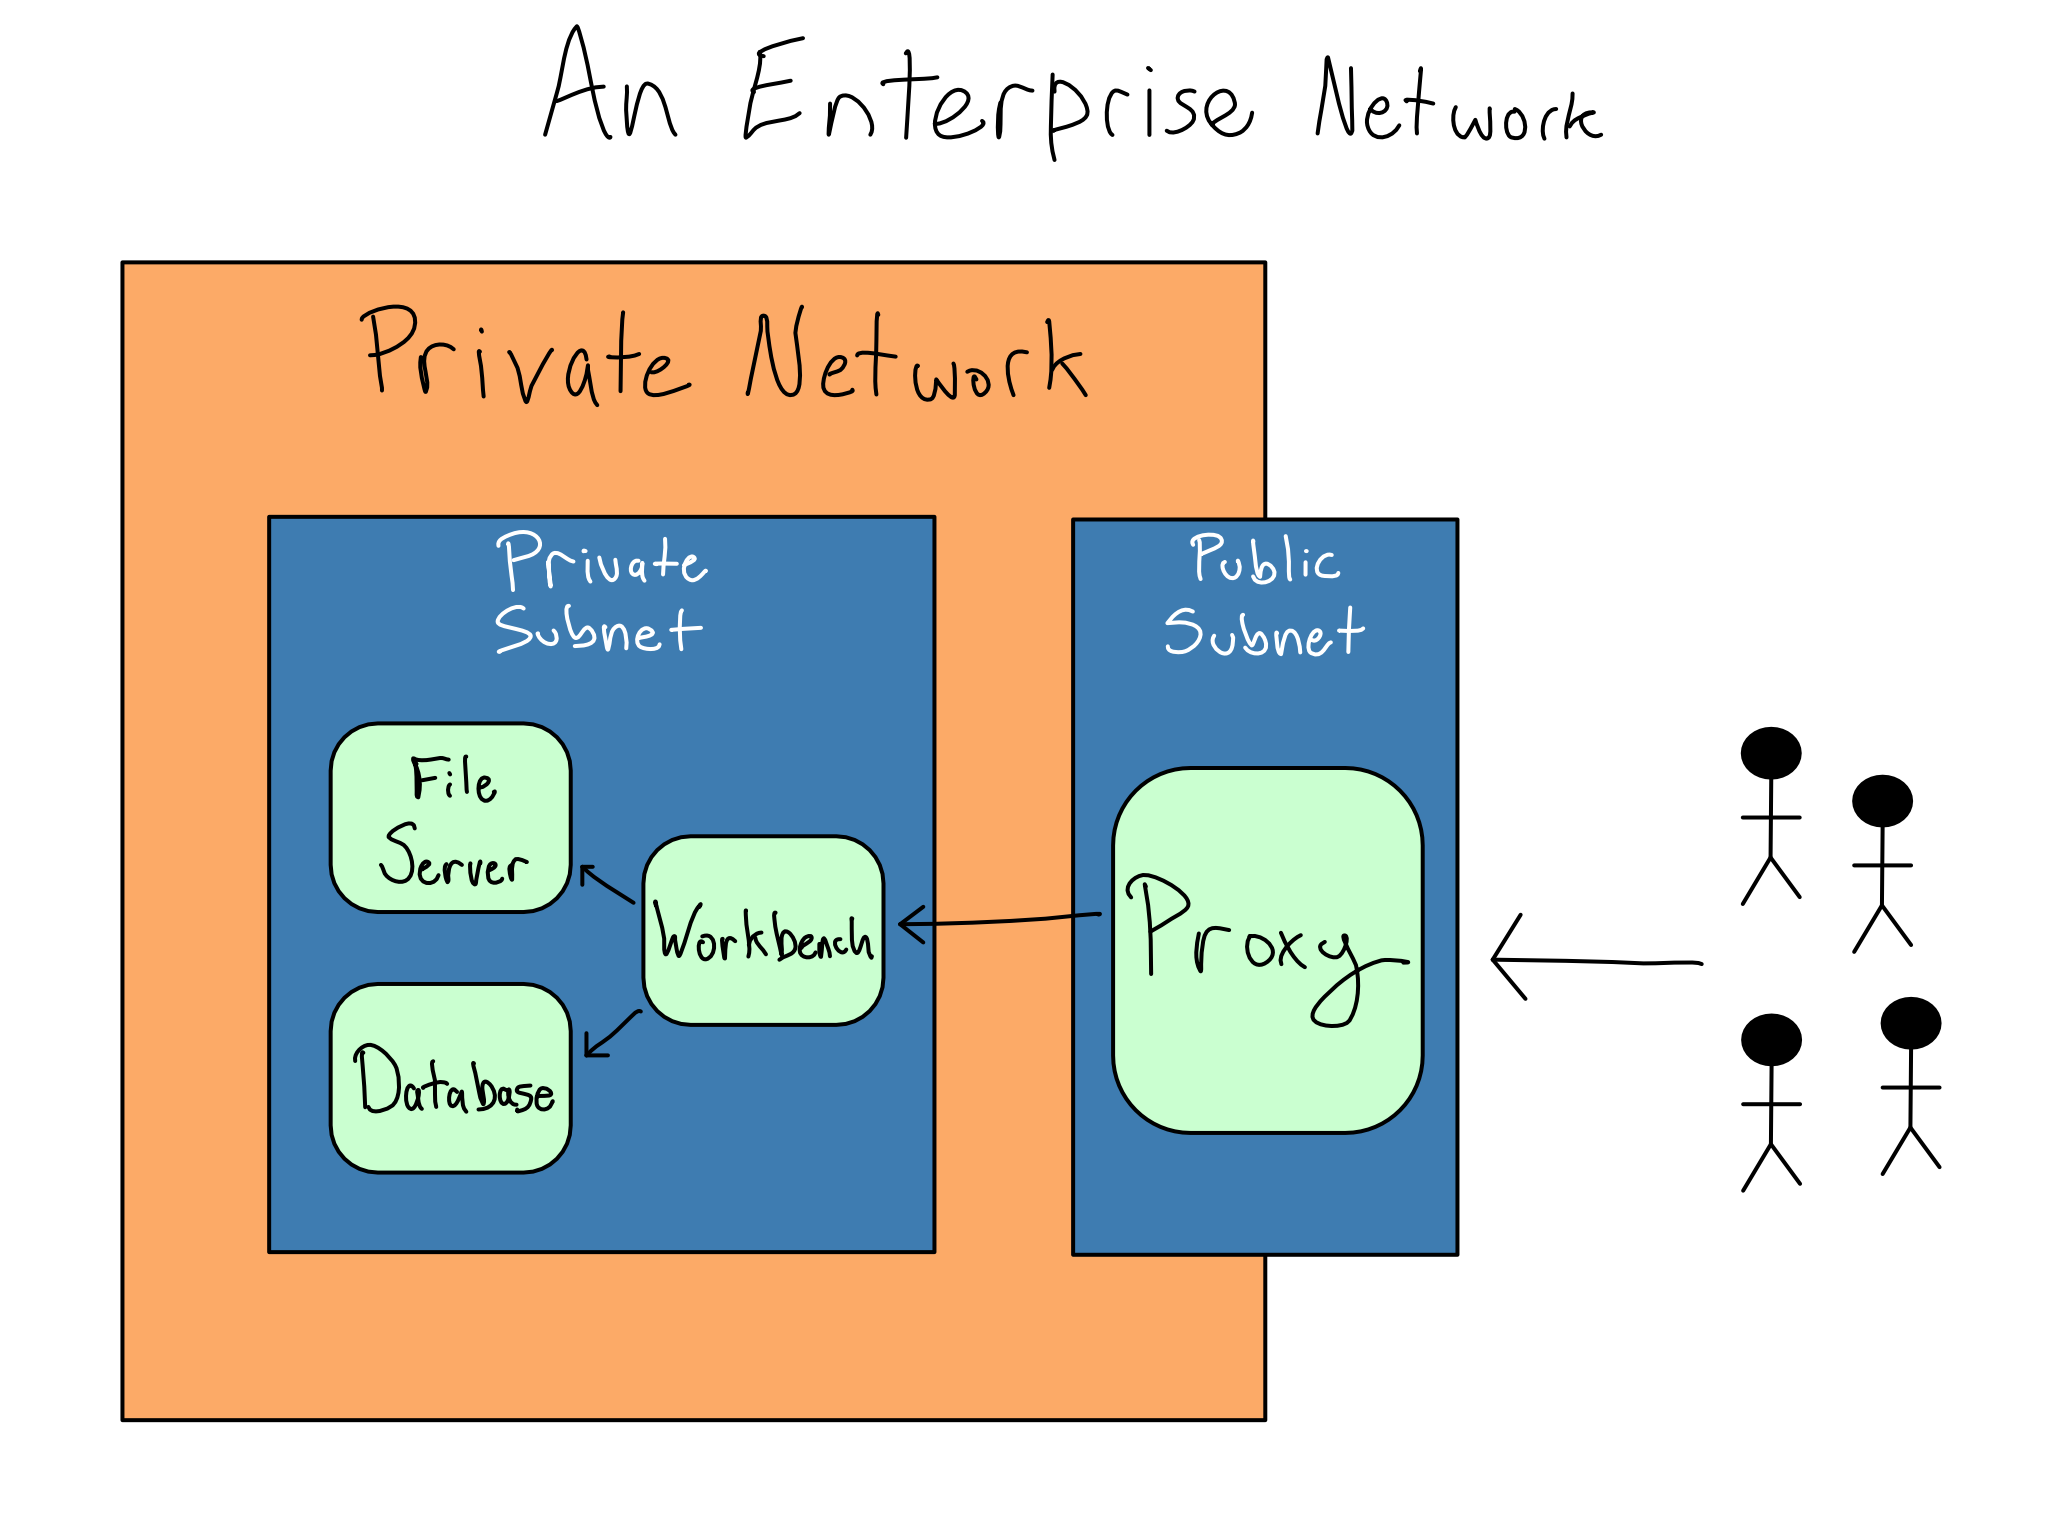 A private network where people come to public subnet with HTTP proxy and Bastion Host. Access to Work Nodes in Private Subnet is only from Public Subnet.